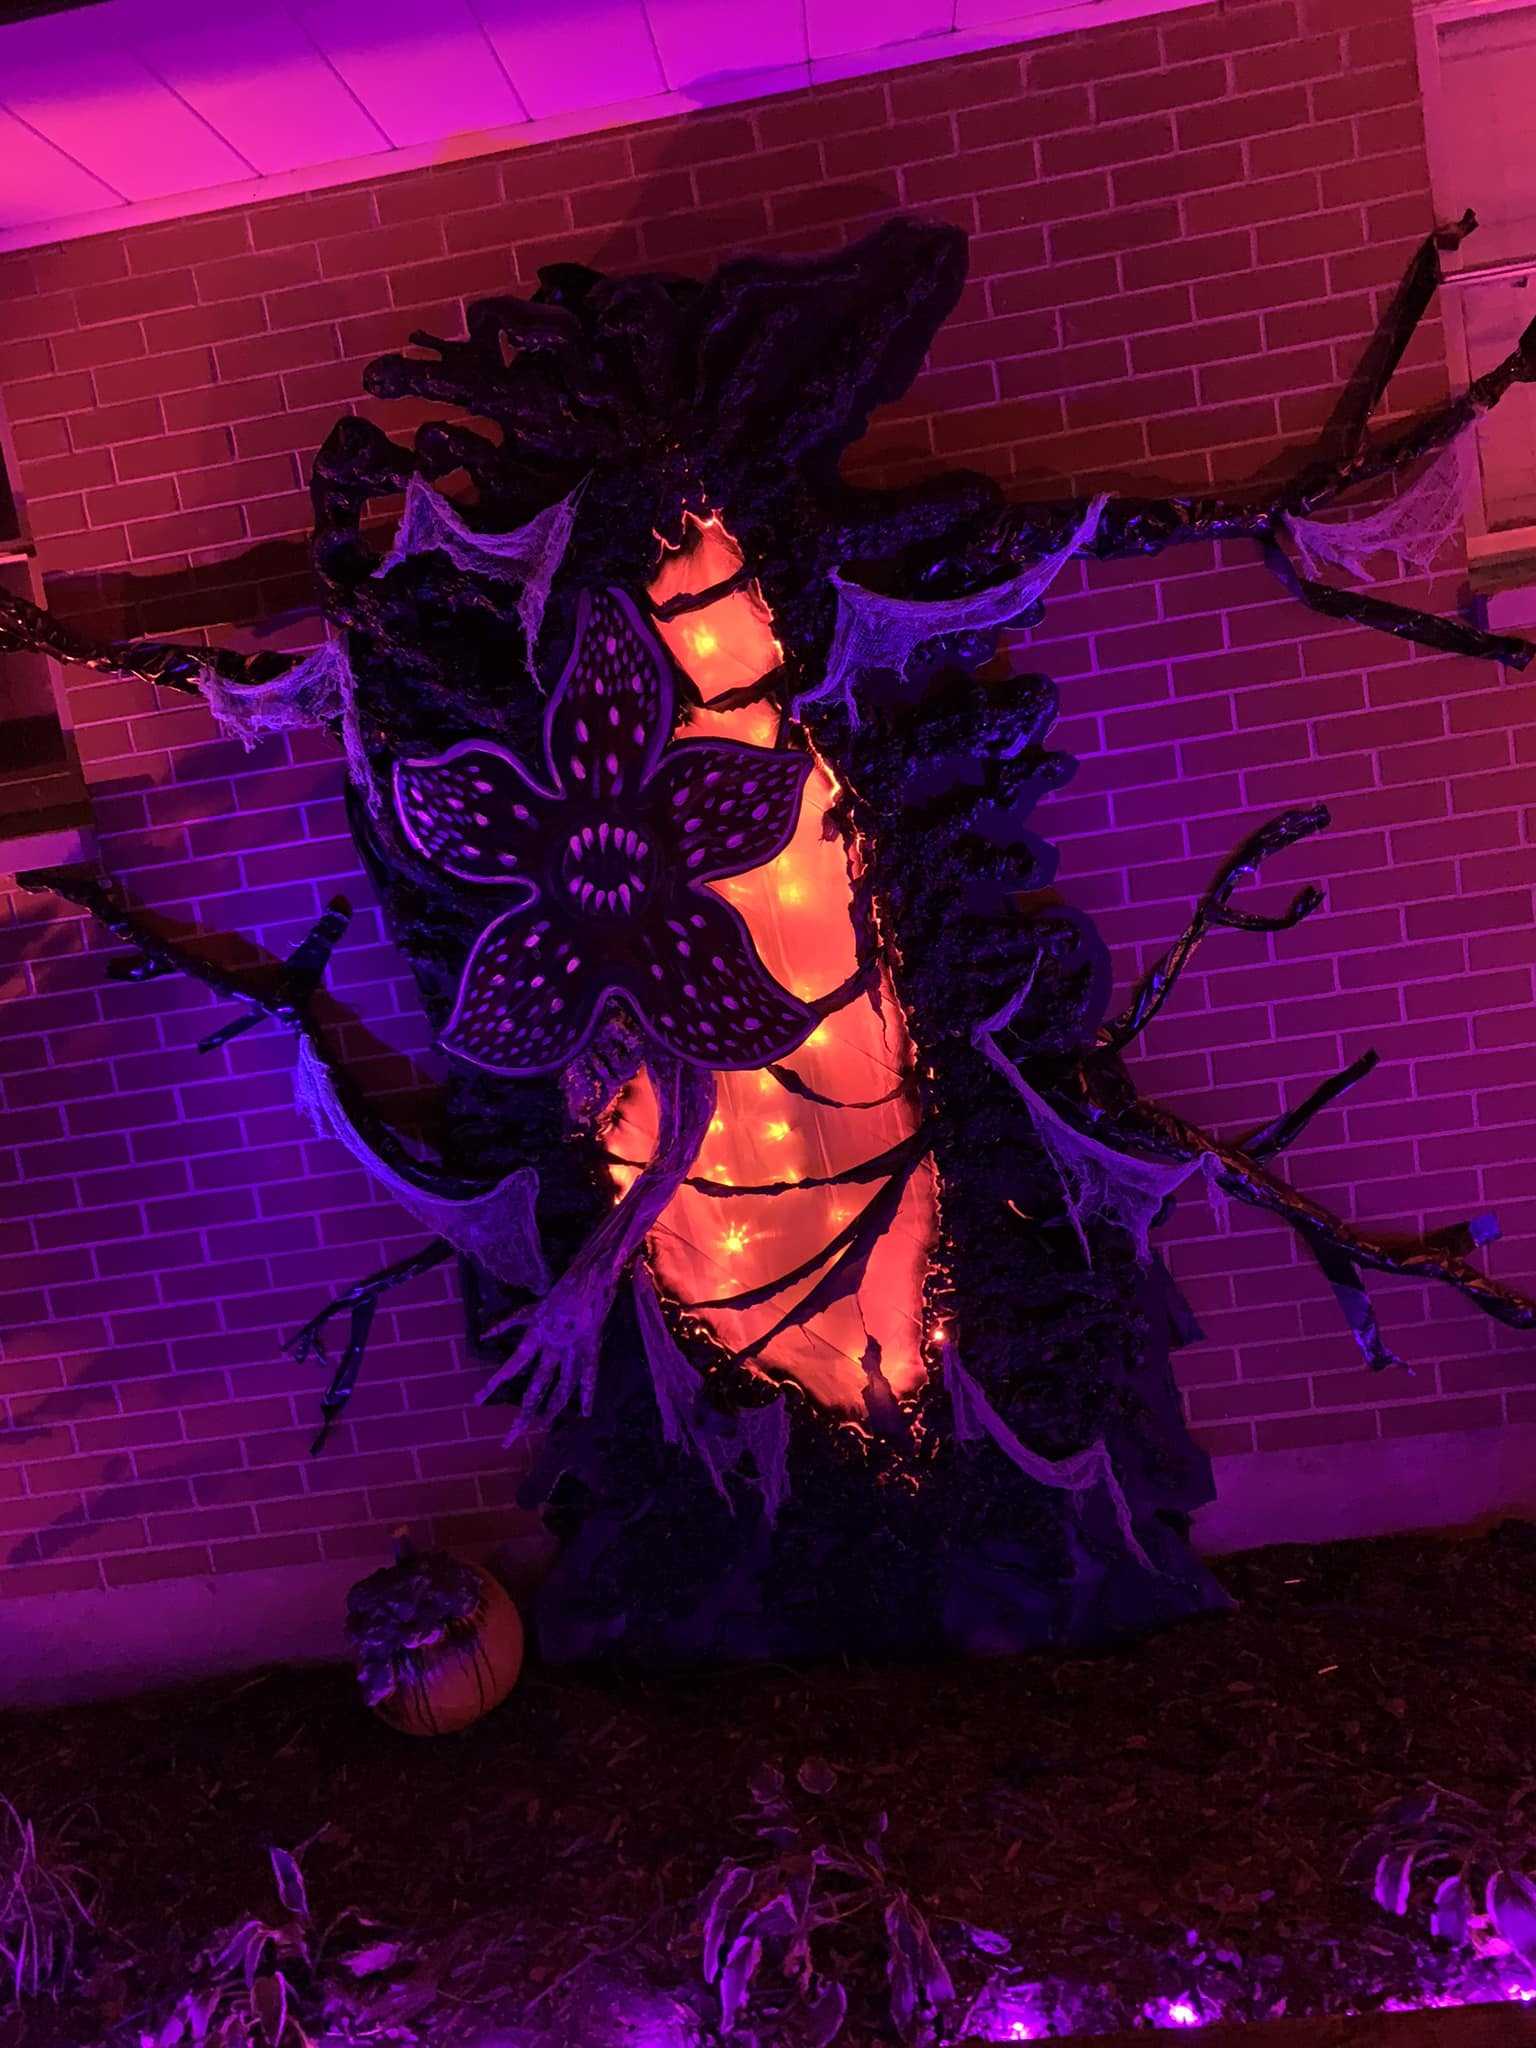 Seattle 'Stranger Things' house shows off next-level Halloween